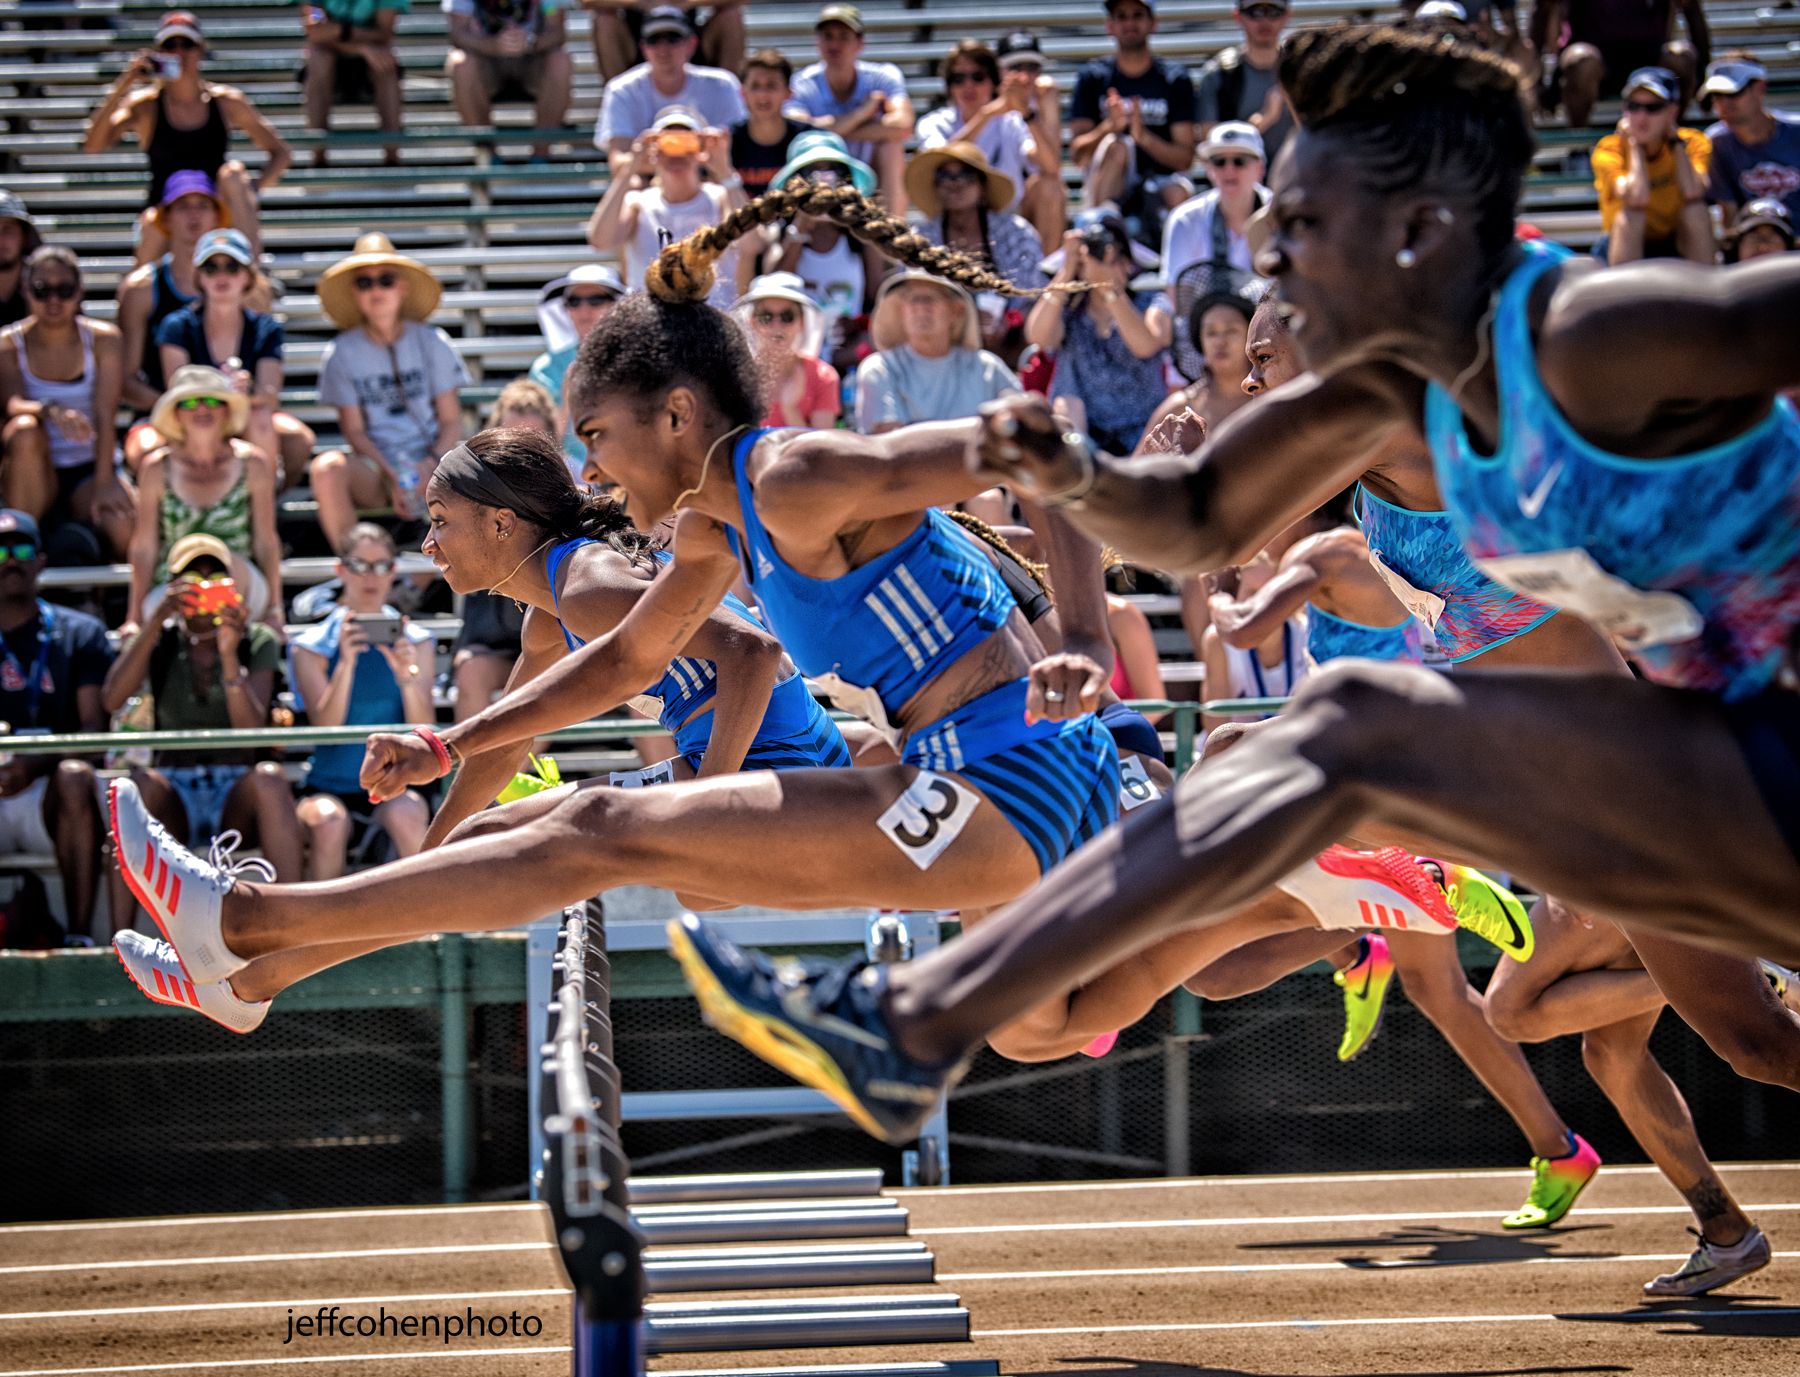 2017-usatf-outdoor-champs-day-3-100mhw--jeff-cohen-photo--4645-web.jpg